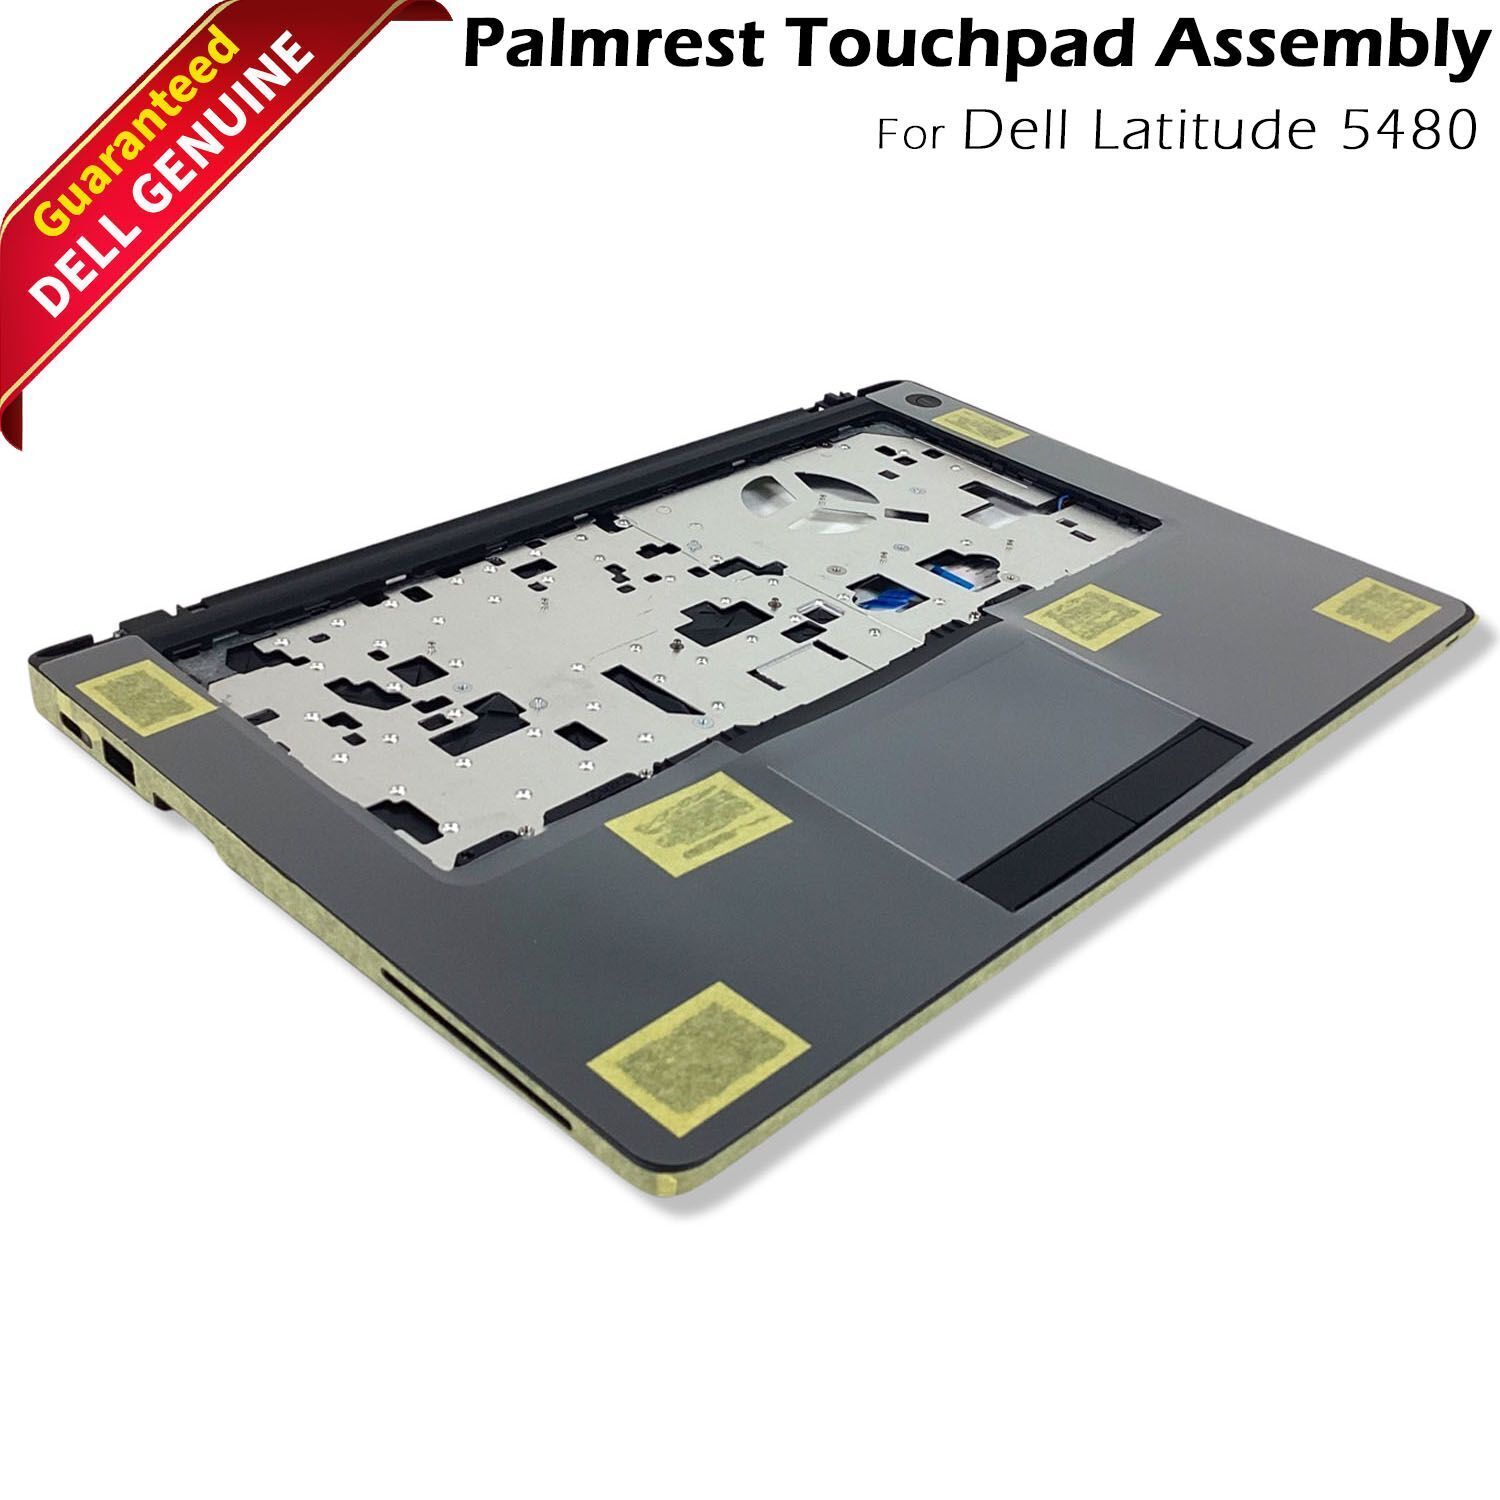 Genuine Dell Latitude 5480 E5480 Palmrest Touchpad Assembly W/SC Reader PD8R8